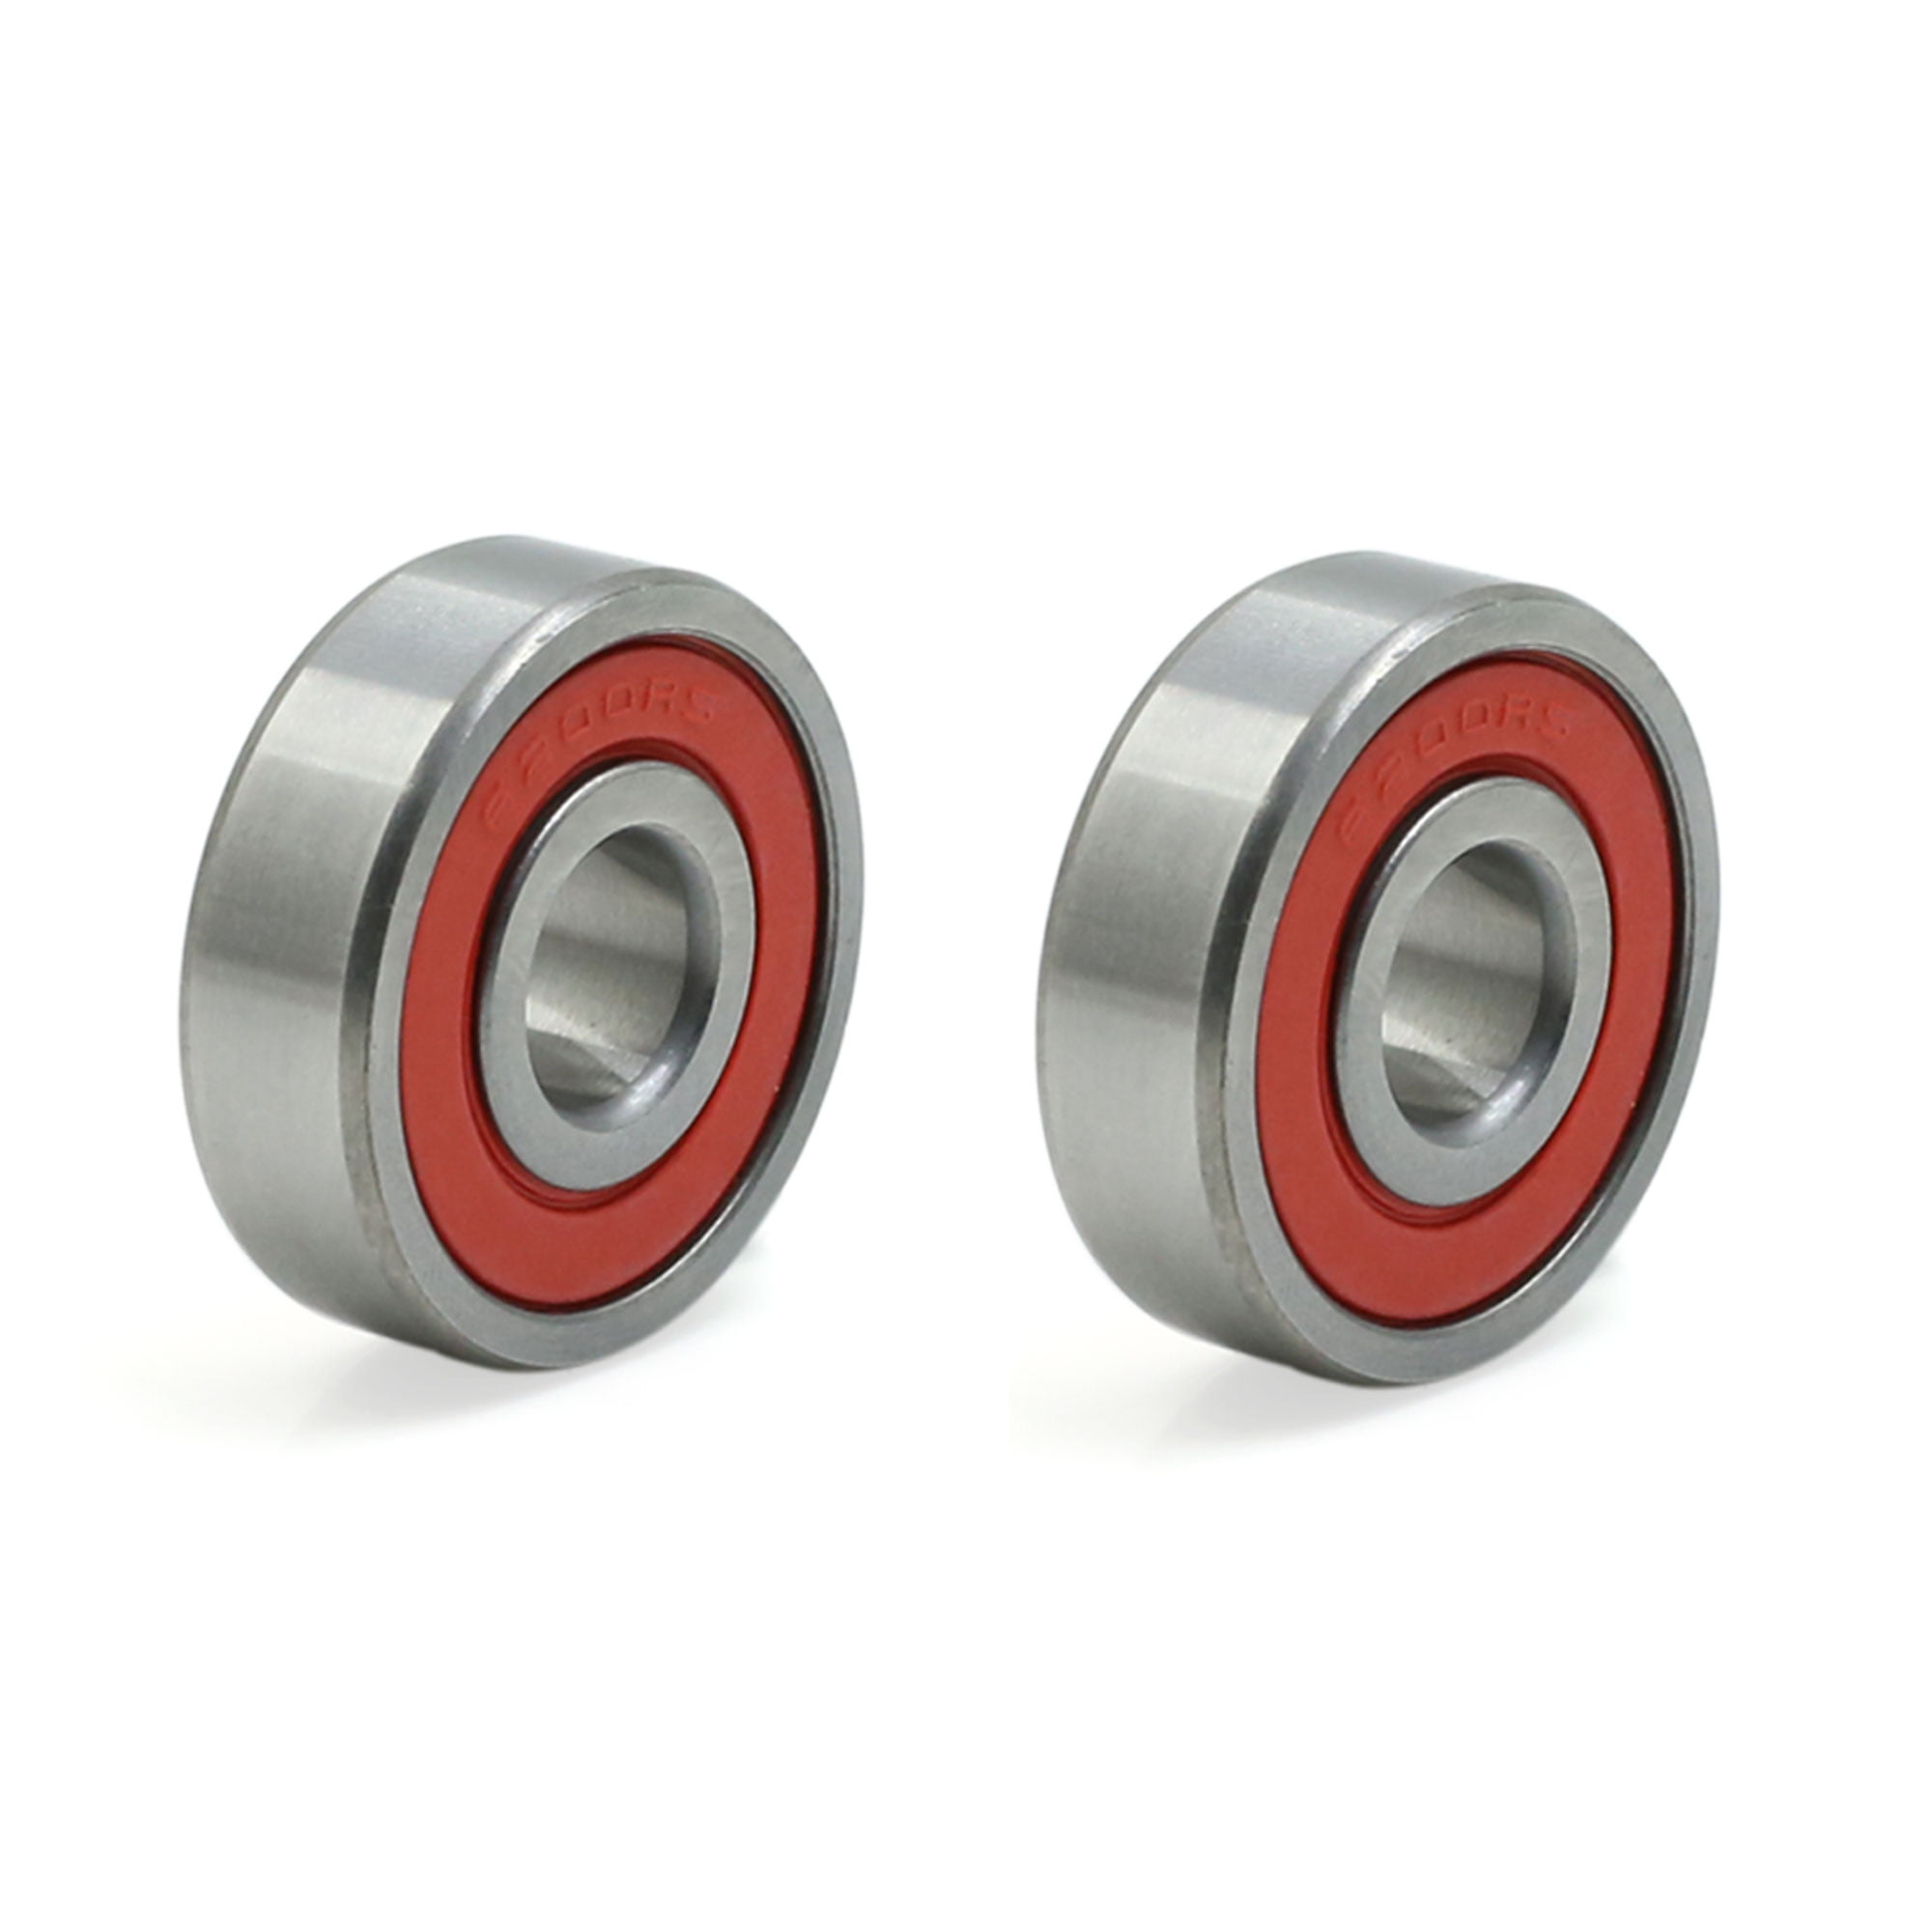 2PCS 6001-2RS 6001RS Deep Groove Rubber Shielded Ball Bearing 12mm*28mm*8mm